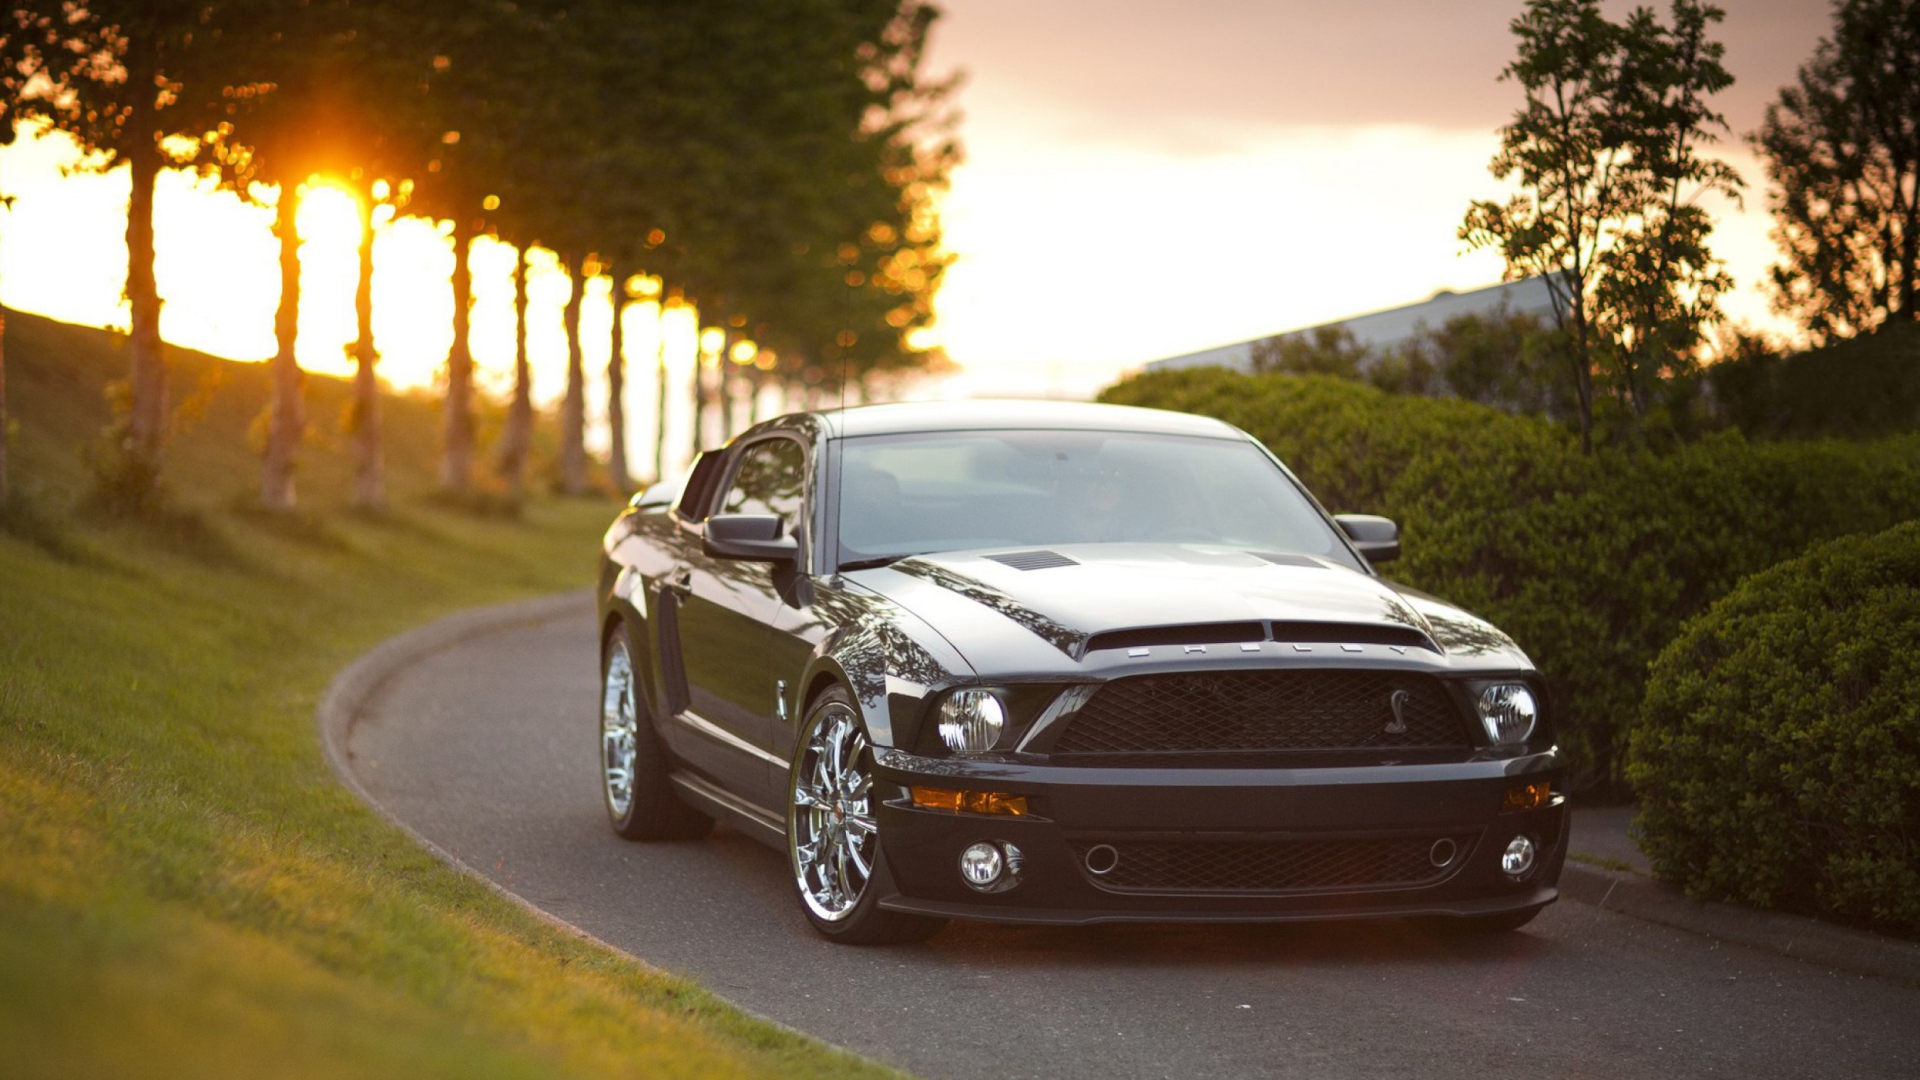 Ford Mustang Shelby GT500KR wallpaper 1920x1080